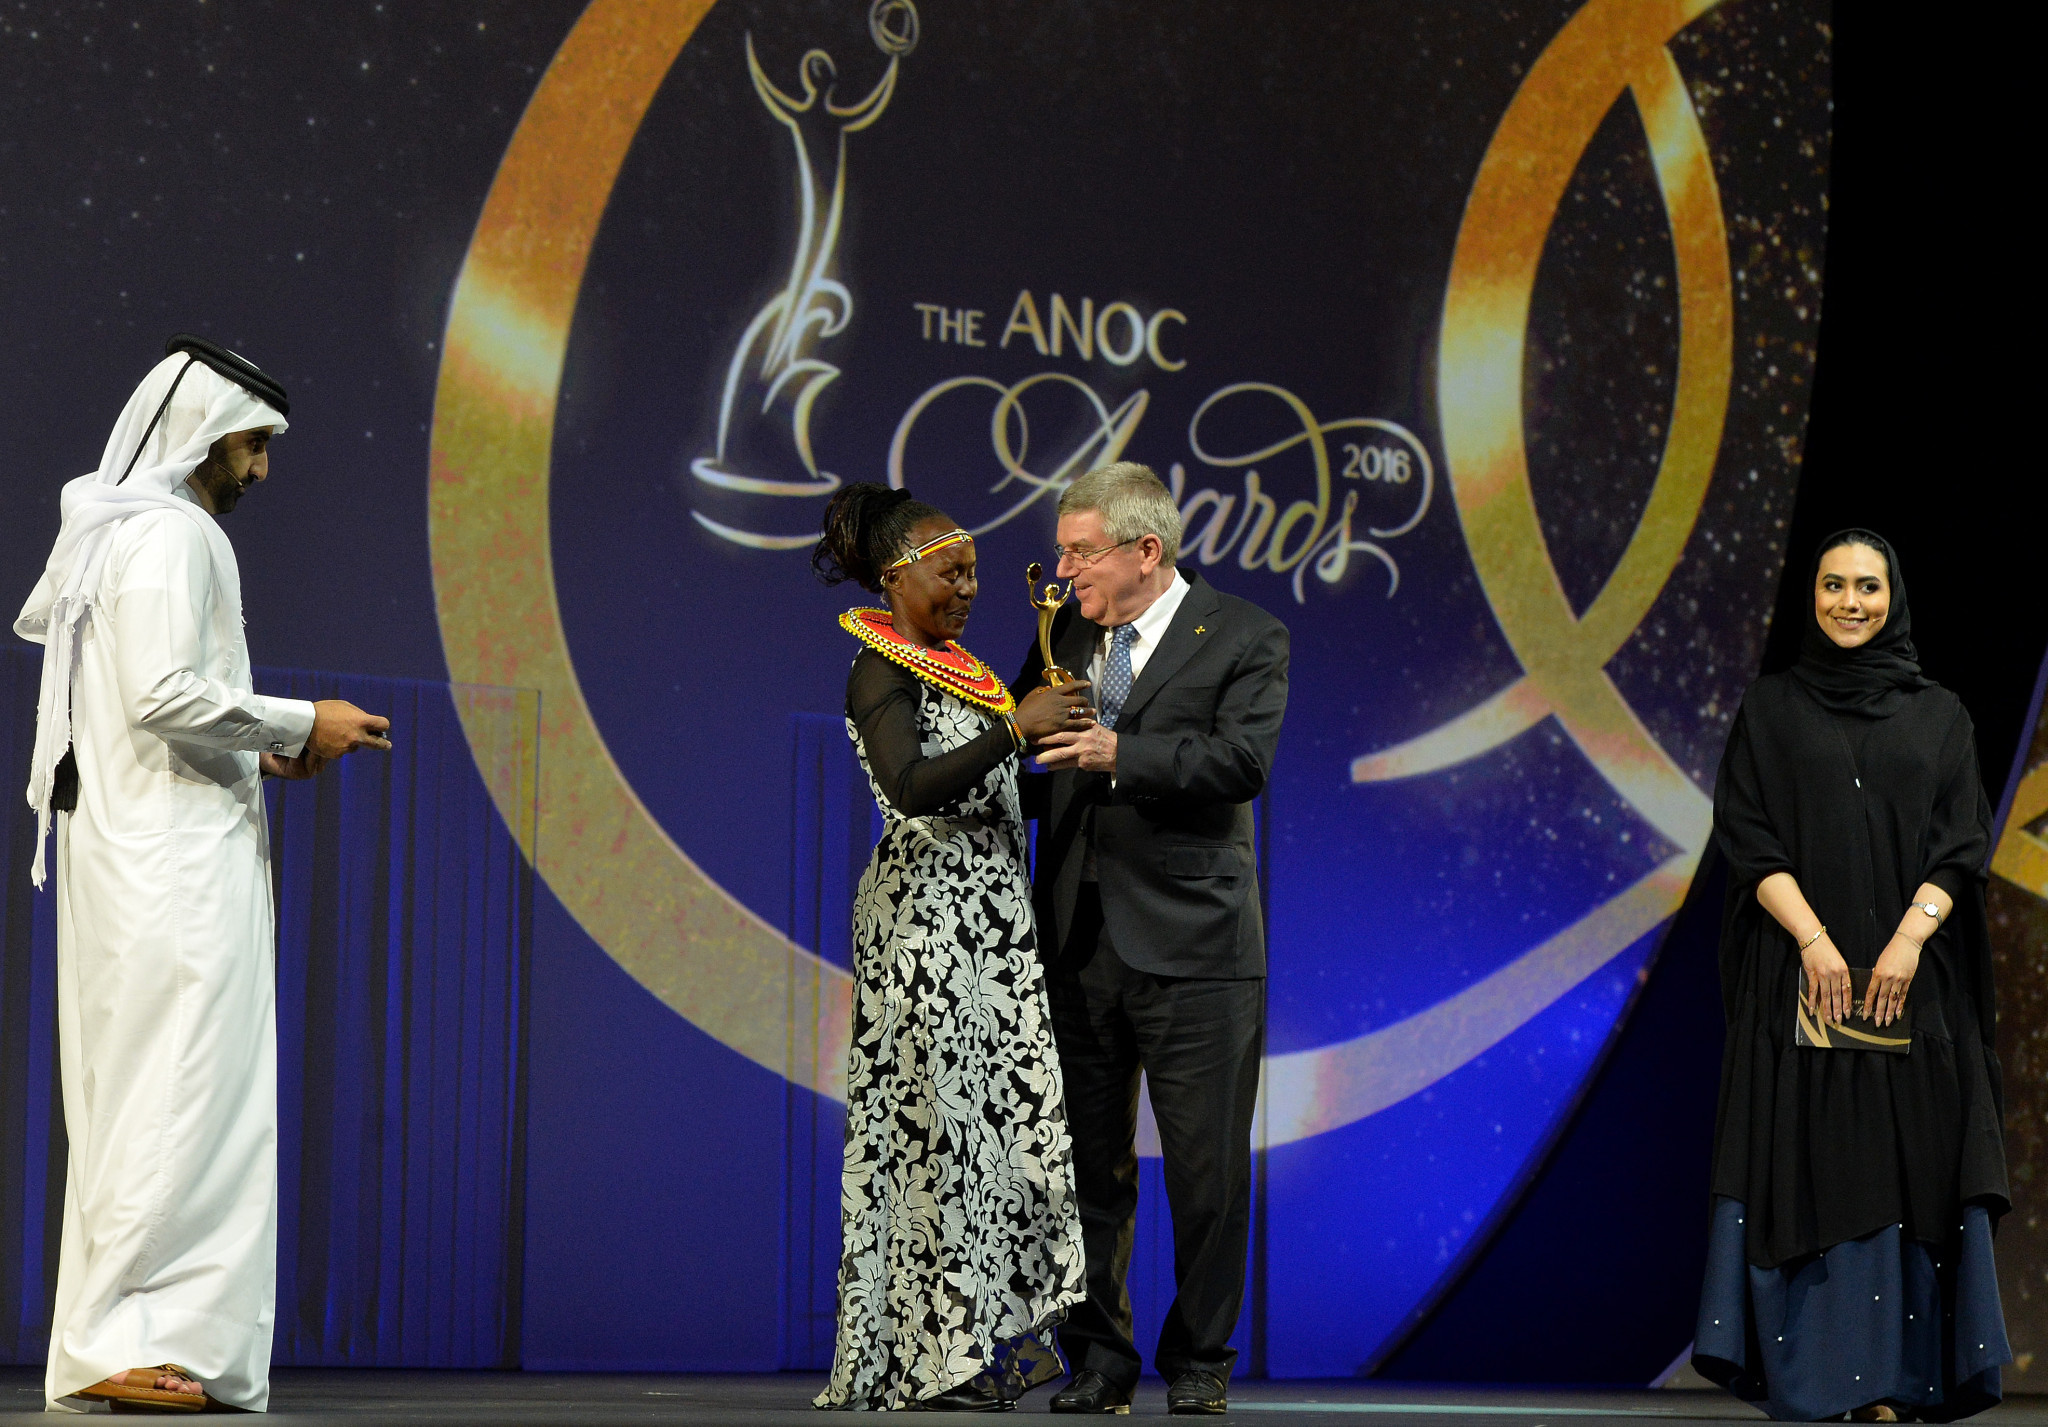 Loroupe added as member of ANOC Athletes' Commission